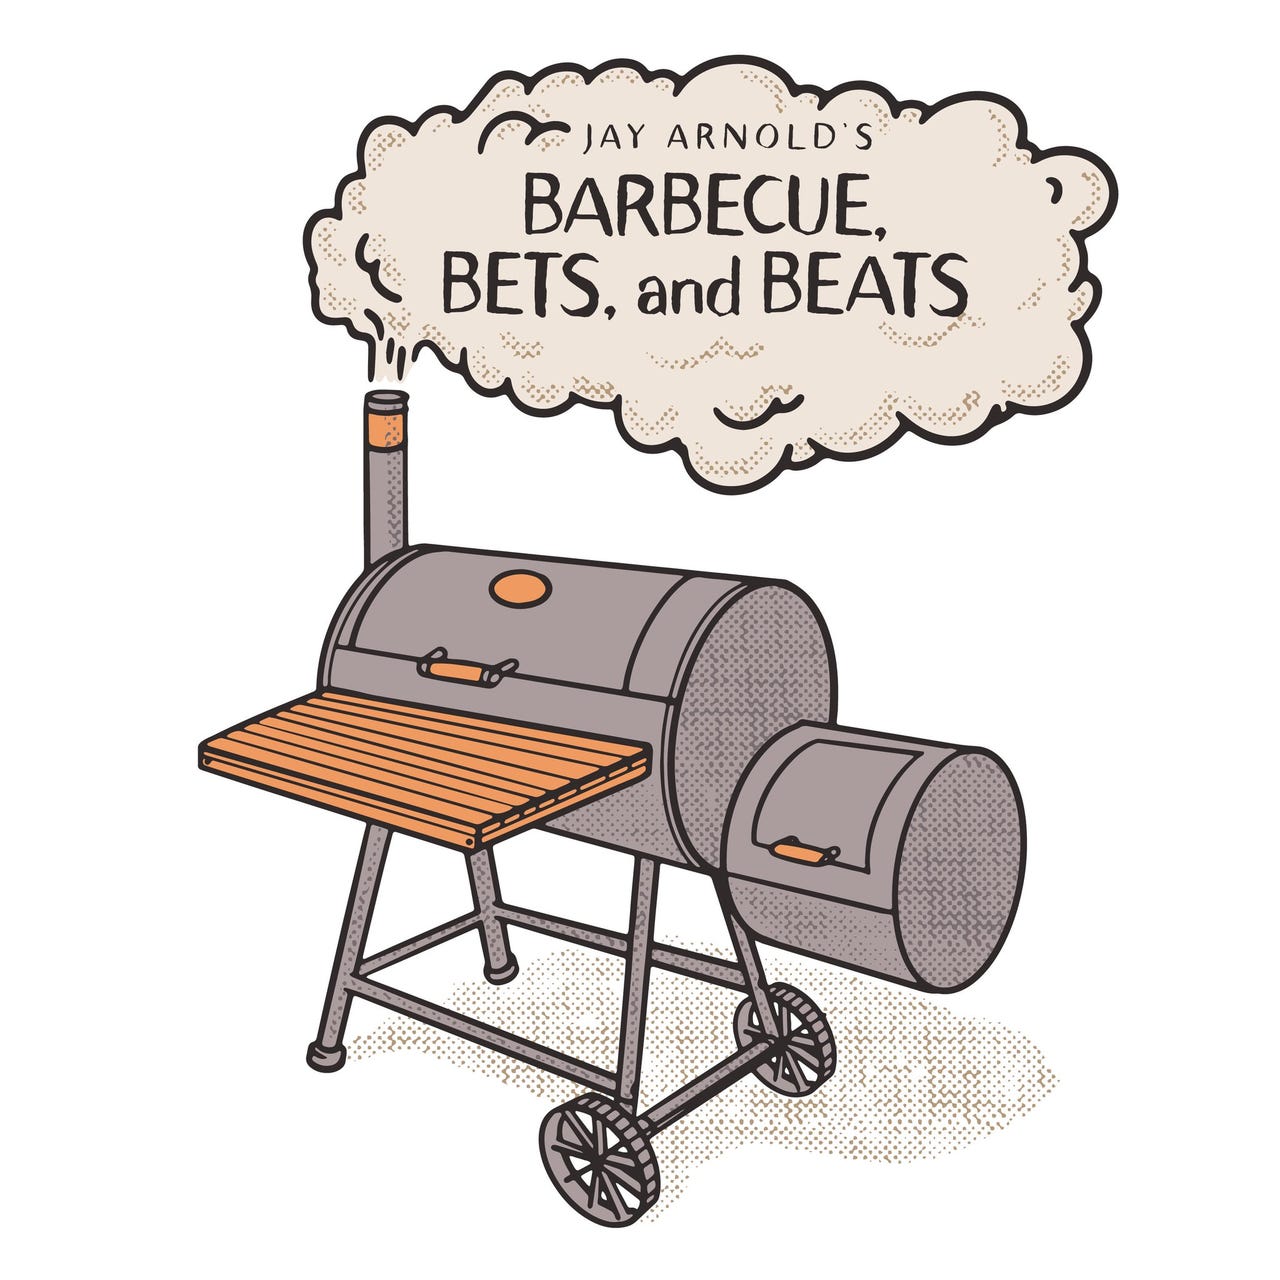 Barbecue, Bets, and Beats